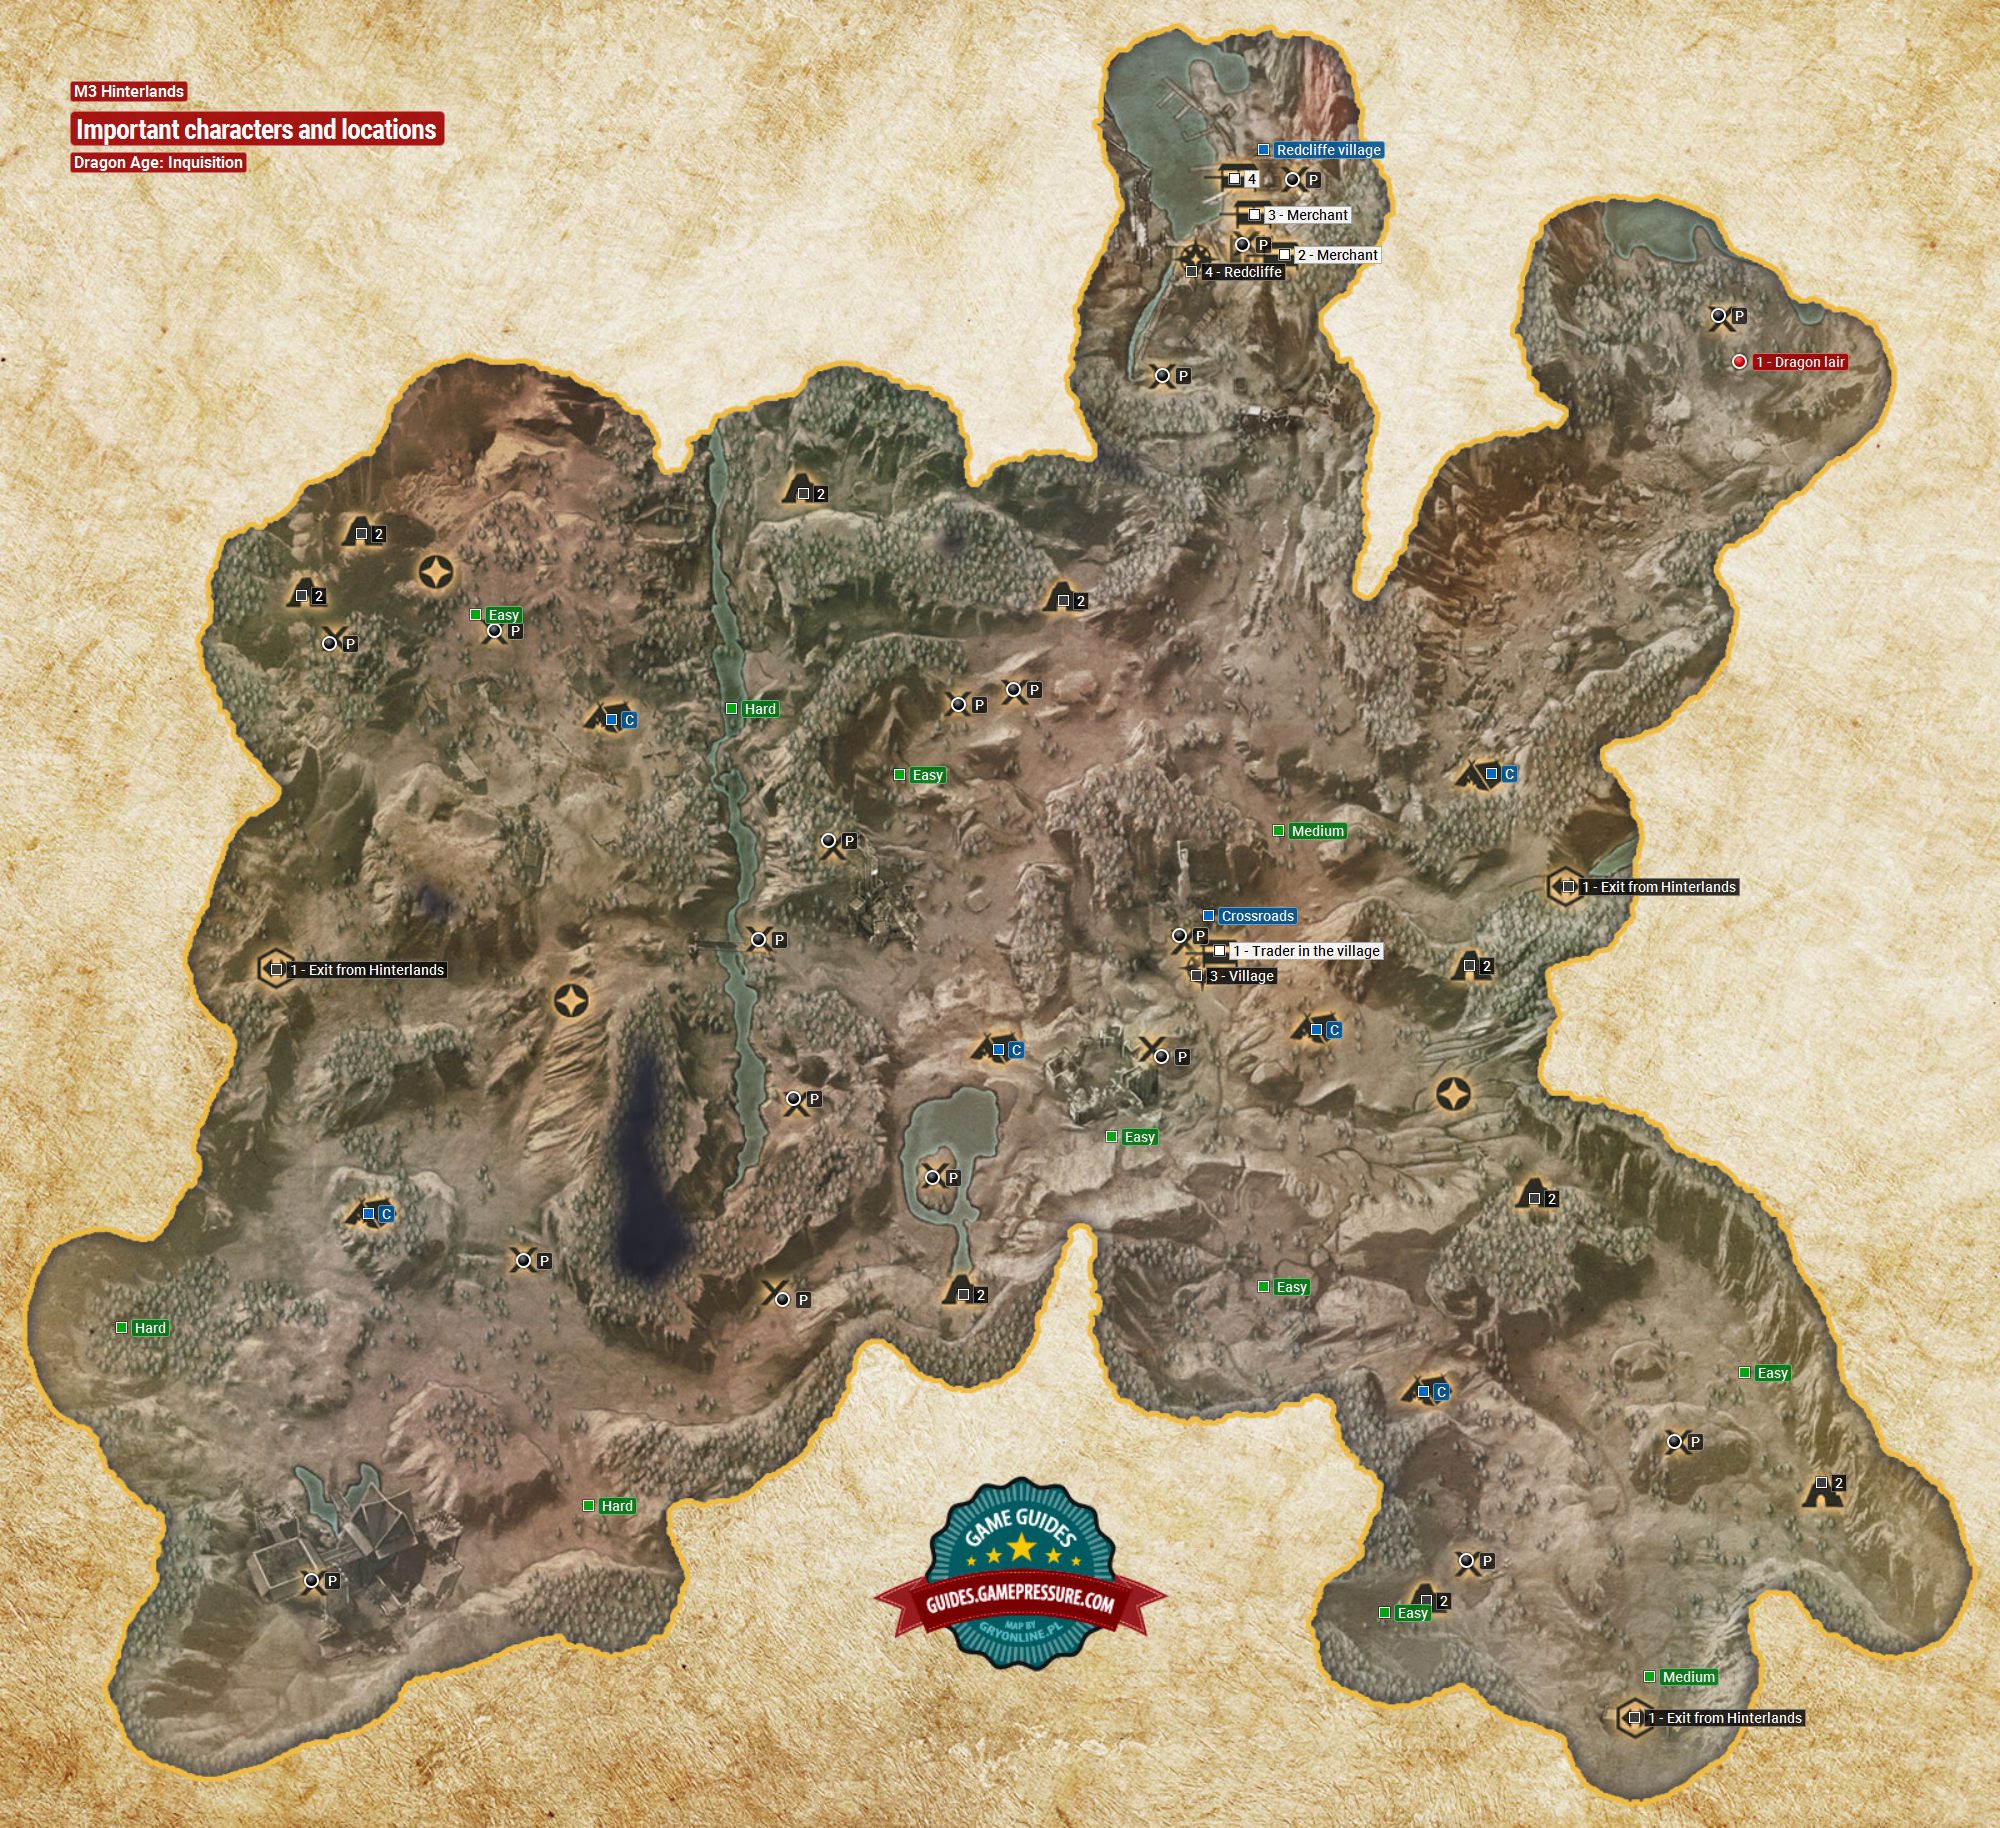 M3 Hinterlands - Important characters and locations - Dragon Age: Inquisition